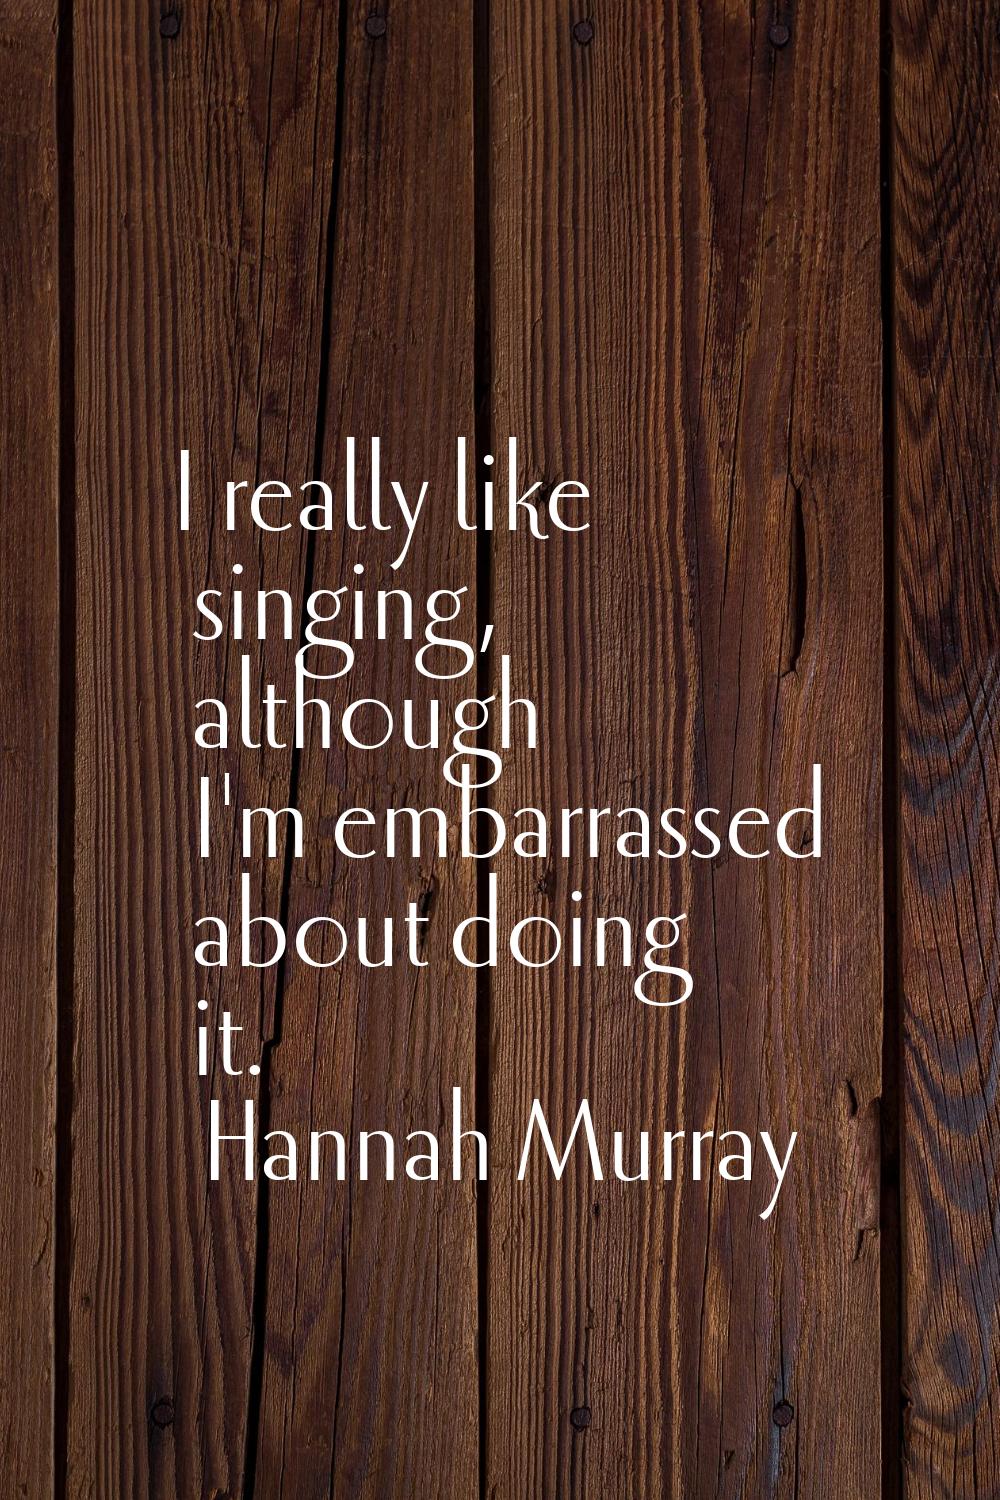 I really like singing, although I'm embarrassed about doing it.